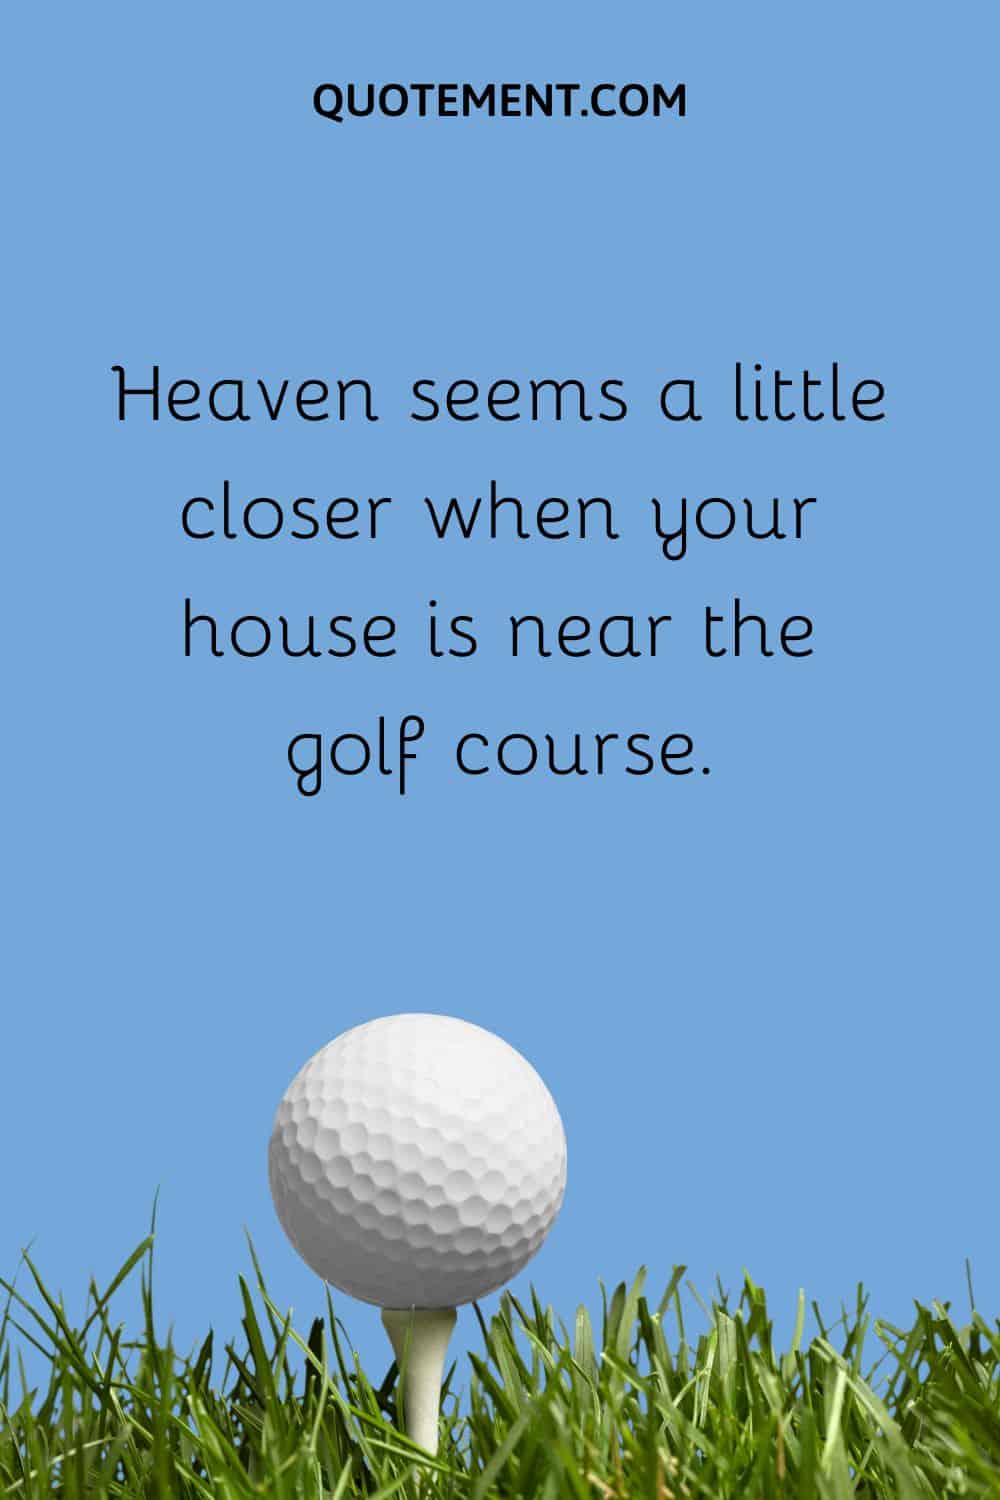 Heaven seems a little closer when your house is near the golf course.